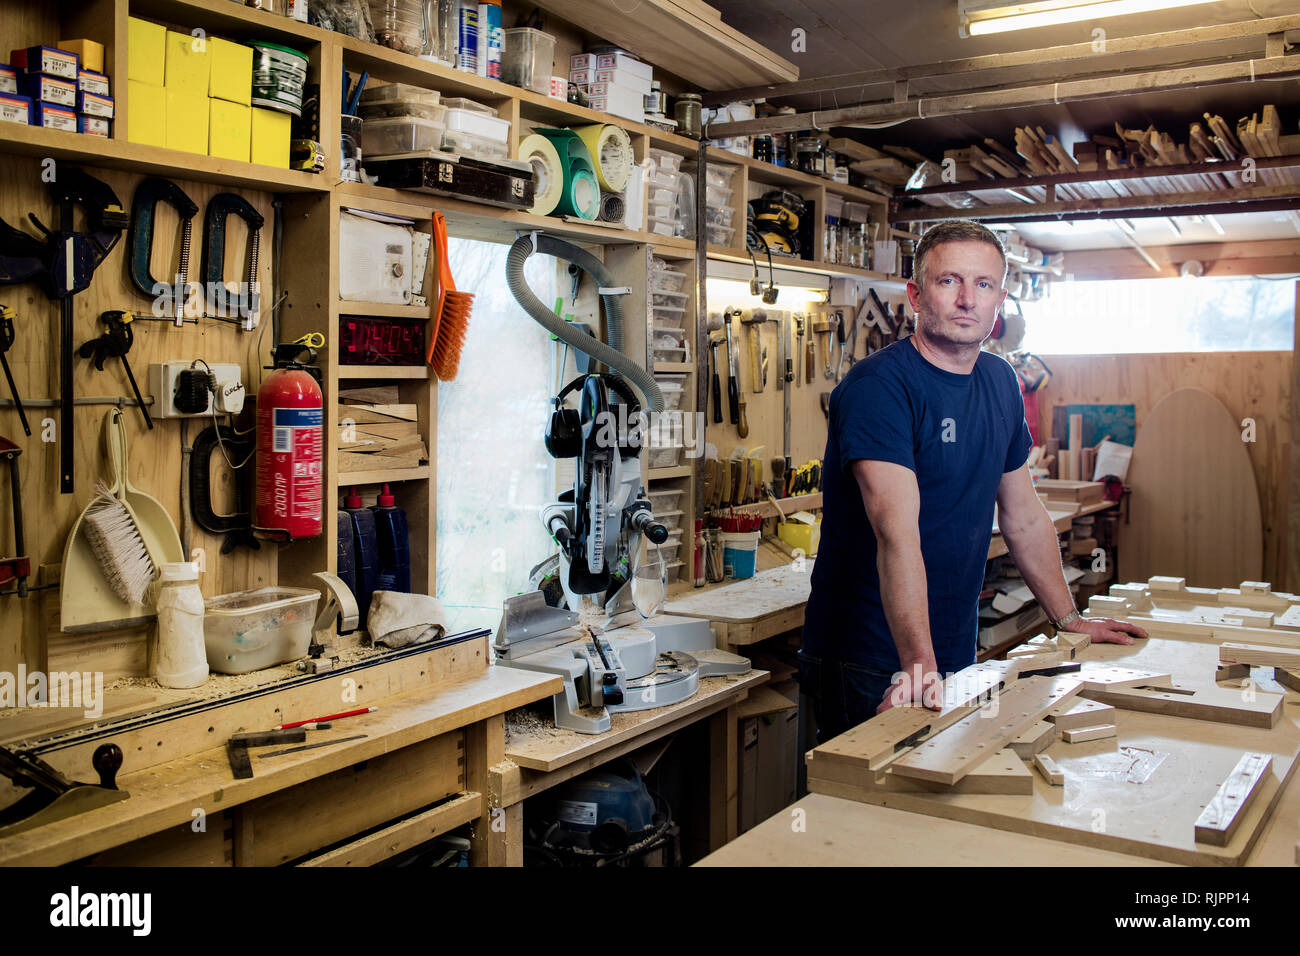 Craftsman beside his workbench and tools Stock Photo